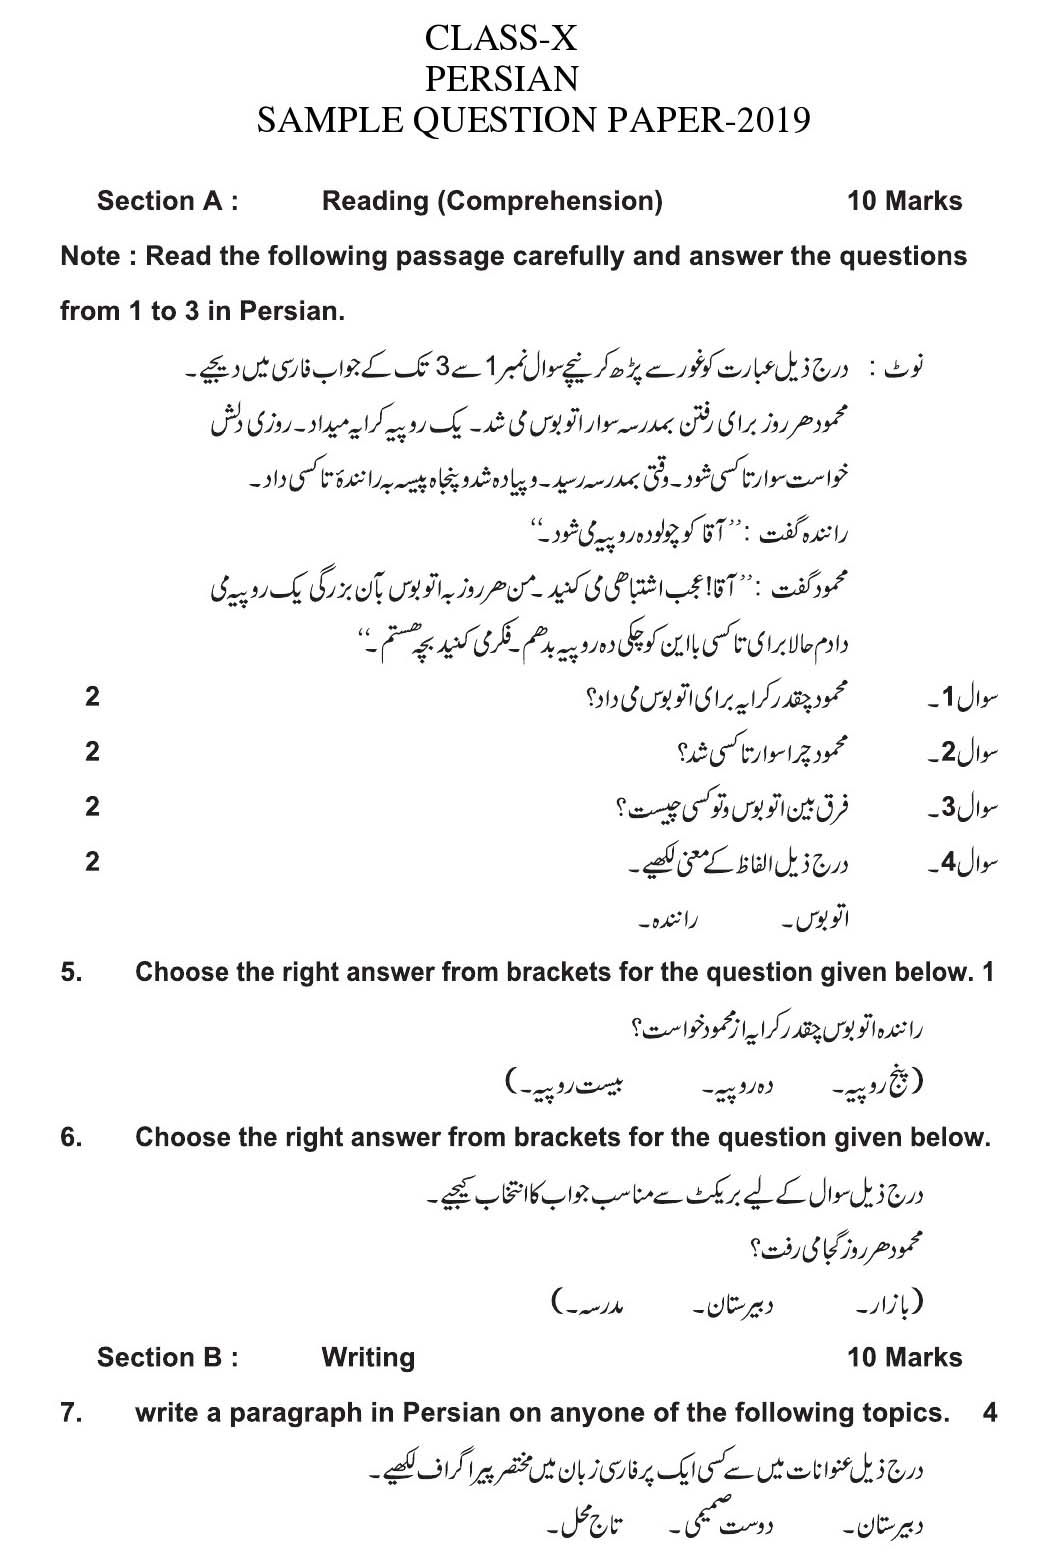 Persian CBSE Class X Sample Question Paper 2018-19 - Image 1